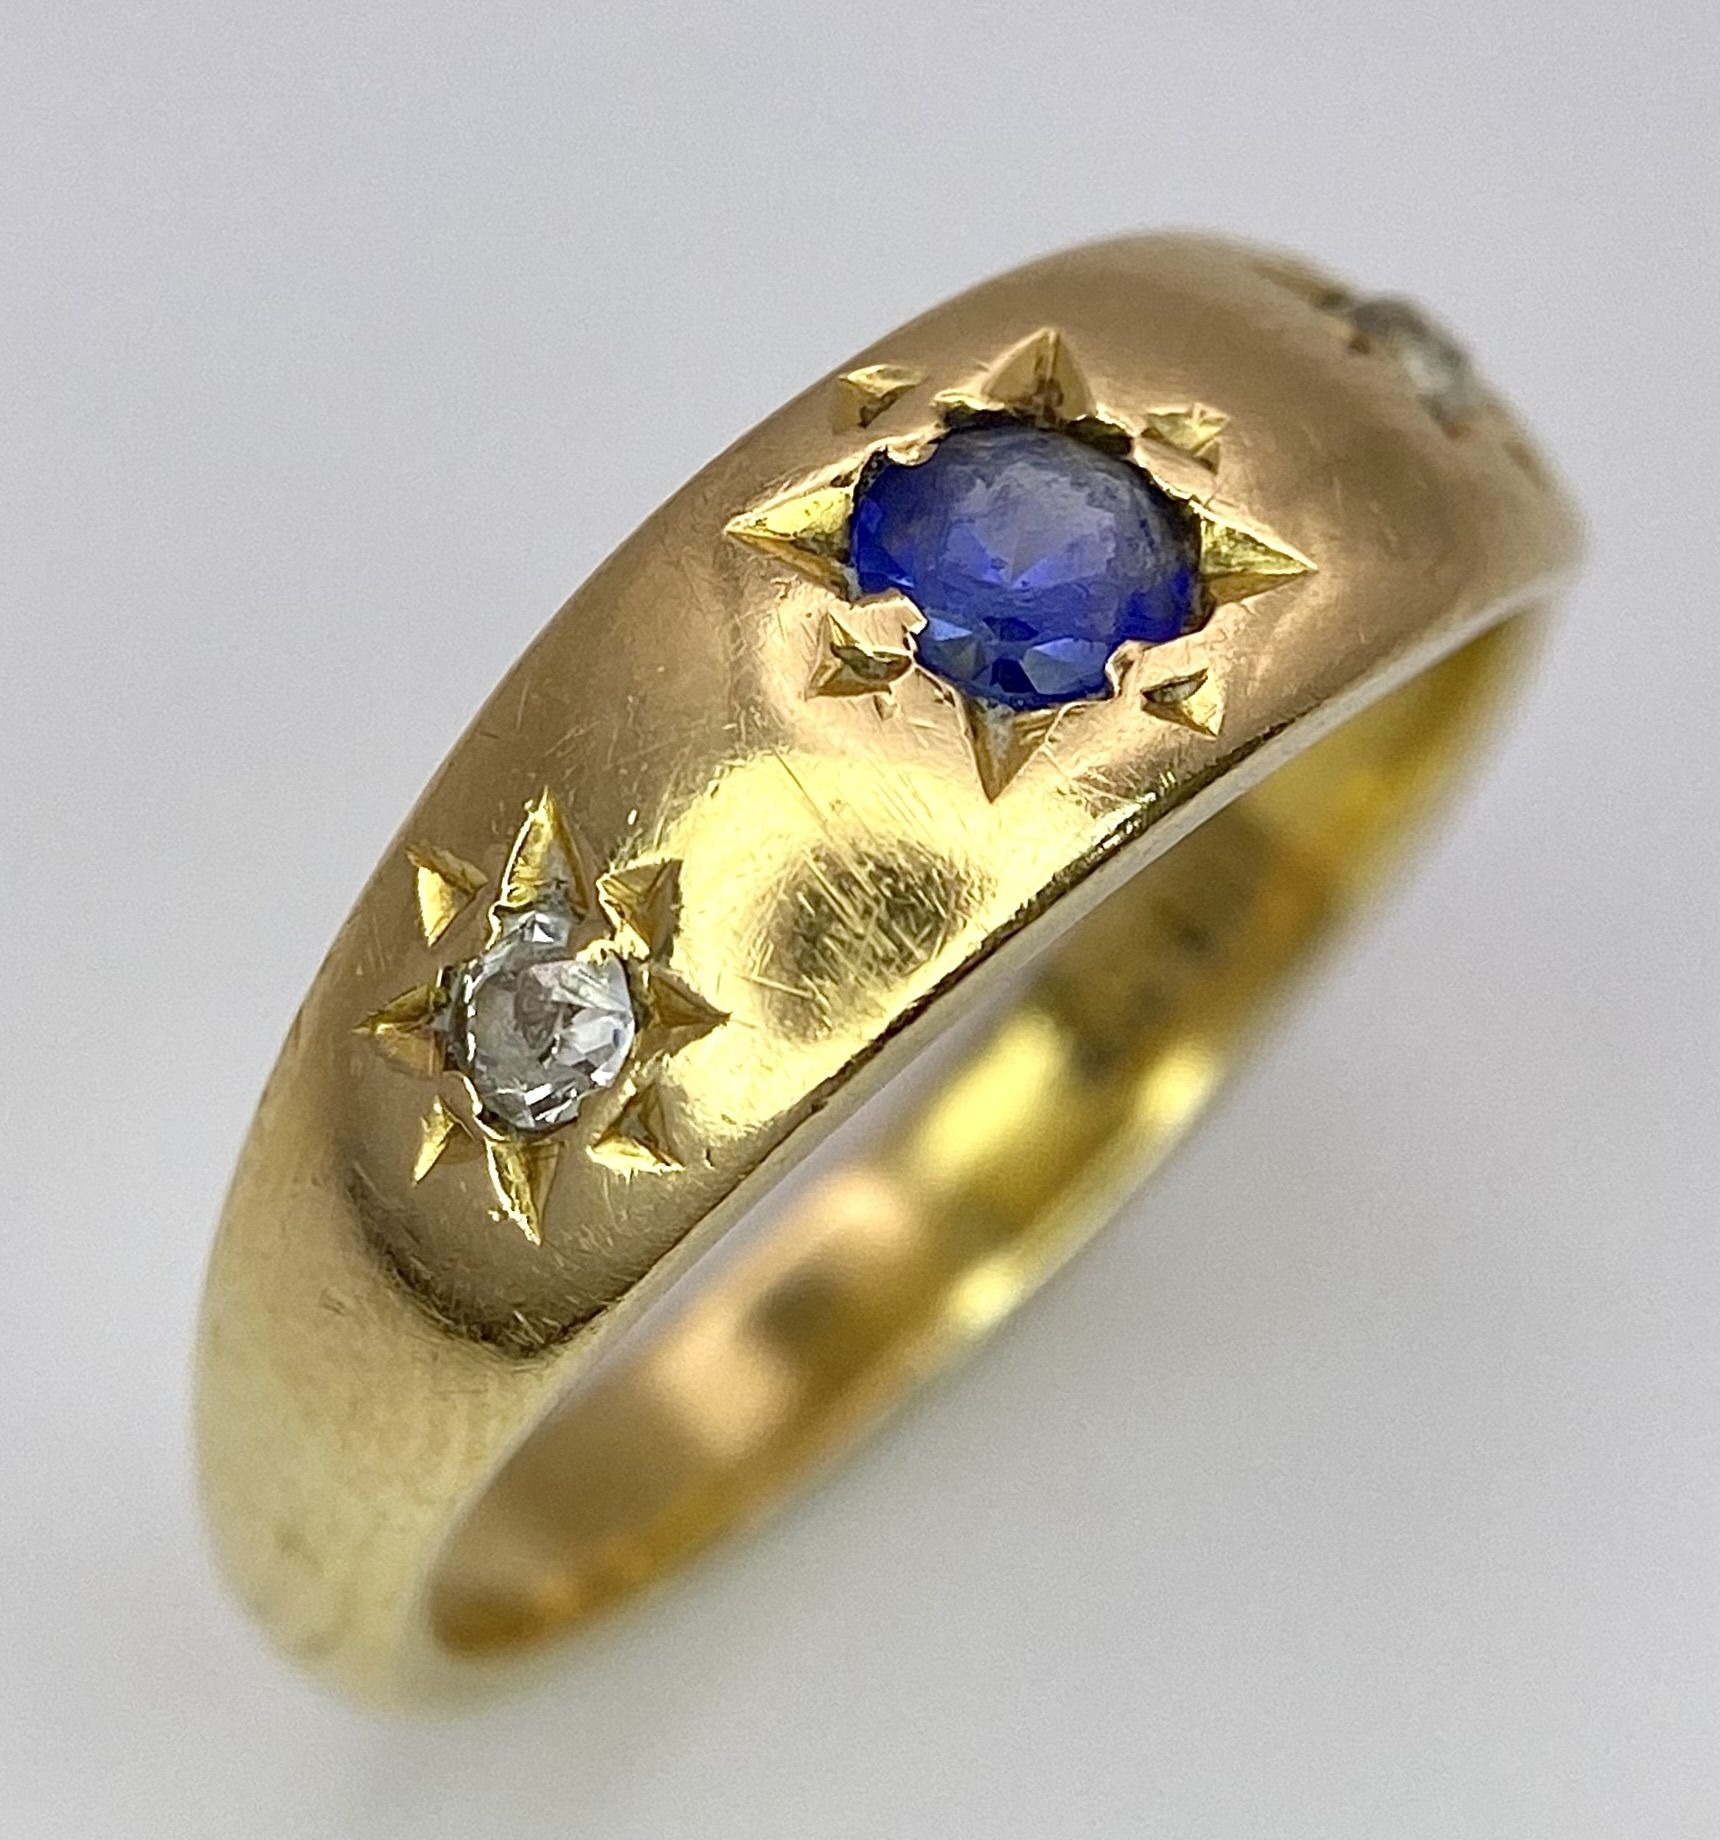 A Vintage 18K Yellow Gold Diamond and Sapphire Gypsy Ring. Size L. 4.6g total weight. - Image 2 of 6